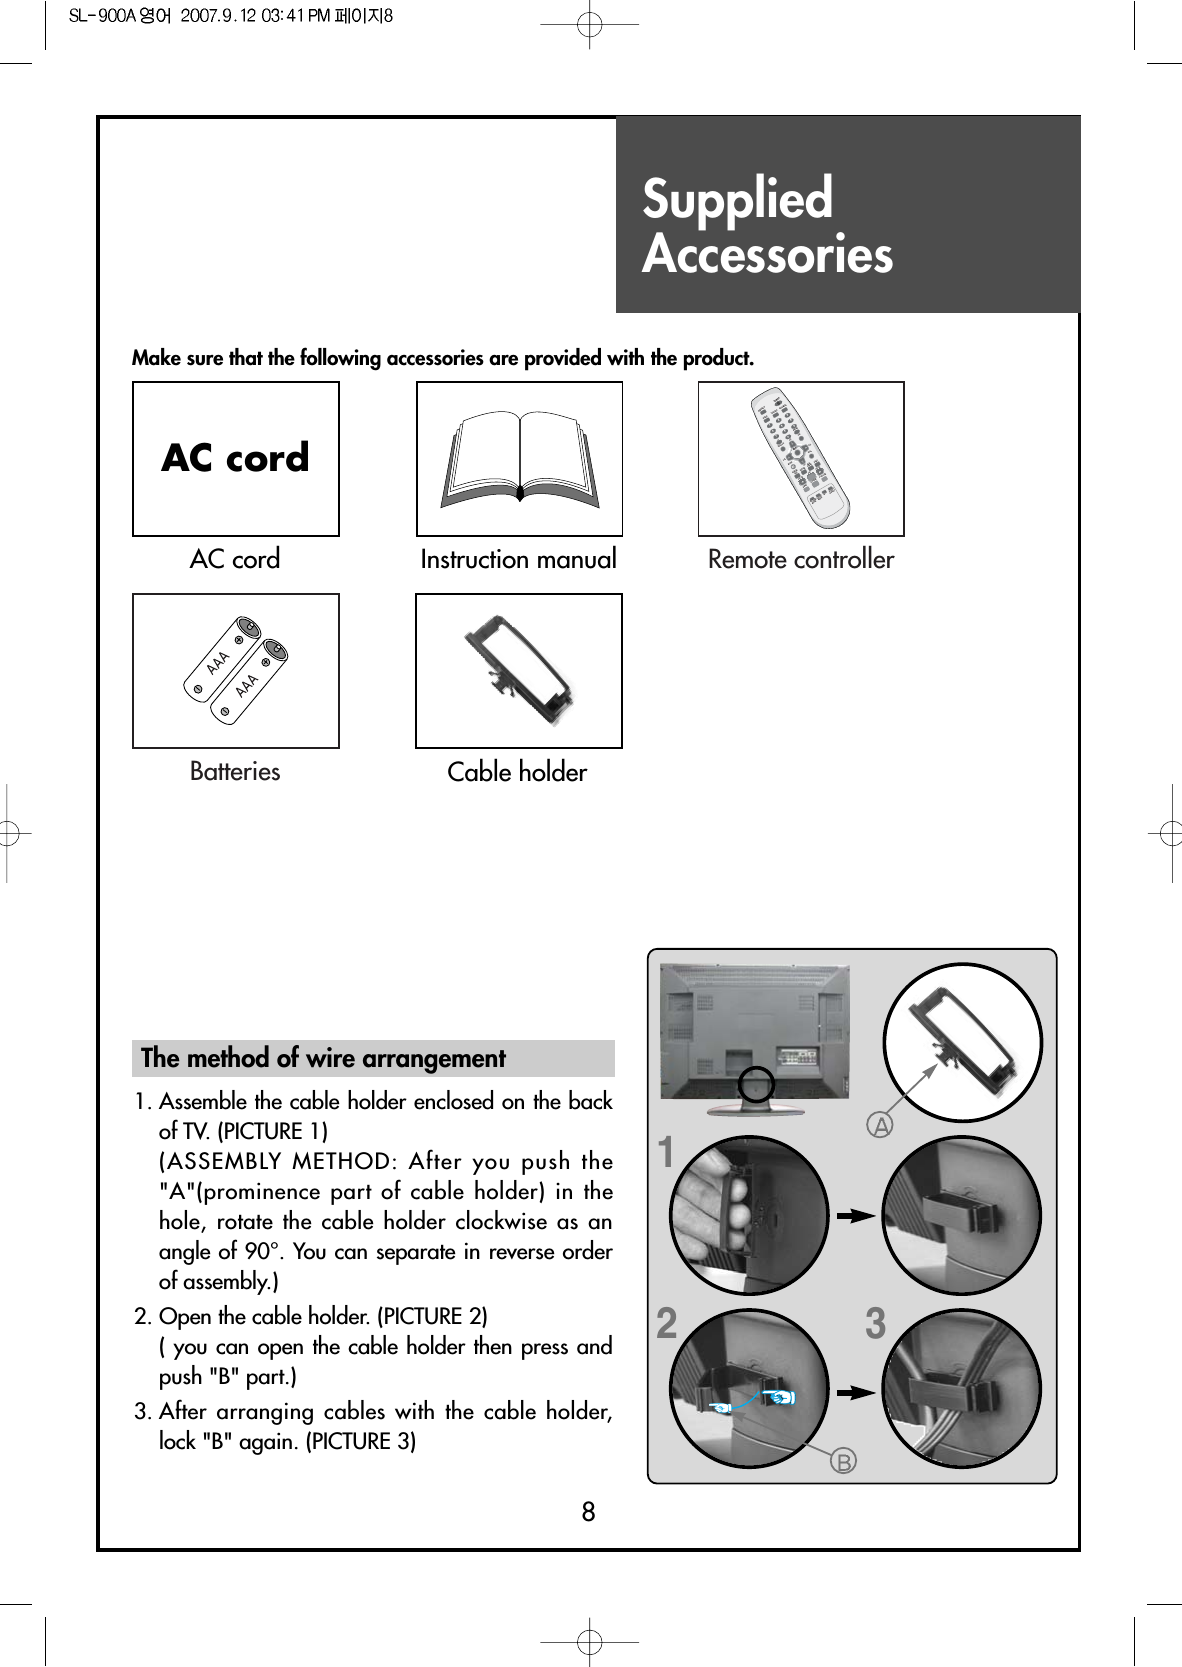 SuppliedAccessories8Make sure that the following accessories are provided with the product.AC cordAC cord Instruction manualDISPLAYMENUGUIDETV/VIDEOFAVPREV.CHMUTESCREENSIZECAPTIONPIP CHPIP CHPIPSWAPPICTUREMODESOUNDMODEMTSSOUNDEFFECTSOURCEPOSITIONSLEEPVOLVOLCHCHMULTIMEDIAENTERPOWER1234567809STILLADD/ERASERemote controllerBatteries Cable holder123The method of wire arrangement1. Assemble the cable holder enclosed on the backof TV. (PICTURE 1) (ASSEMBLY METHOD: After you push the&quot;A&quot;(prominence part of cable holder) in thehole, rotate the cable holder clockwise as anangle of 90°. You can separate in reverse orderof assembly.)2. Open the cable holder. (PICTURE 2)( you can open the cable holder then press andpush &quot;B&quot; part.)3. After arranging cables with the cable holder,lock &quot;B&quot; again. (PICTURE 3)